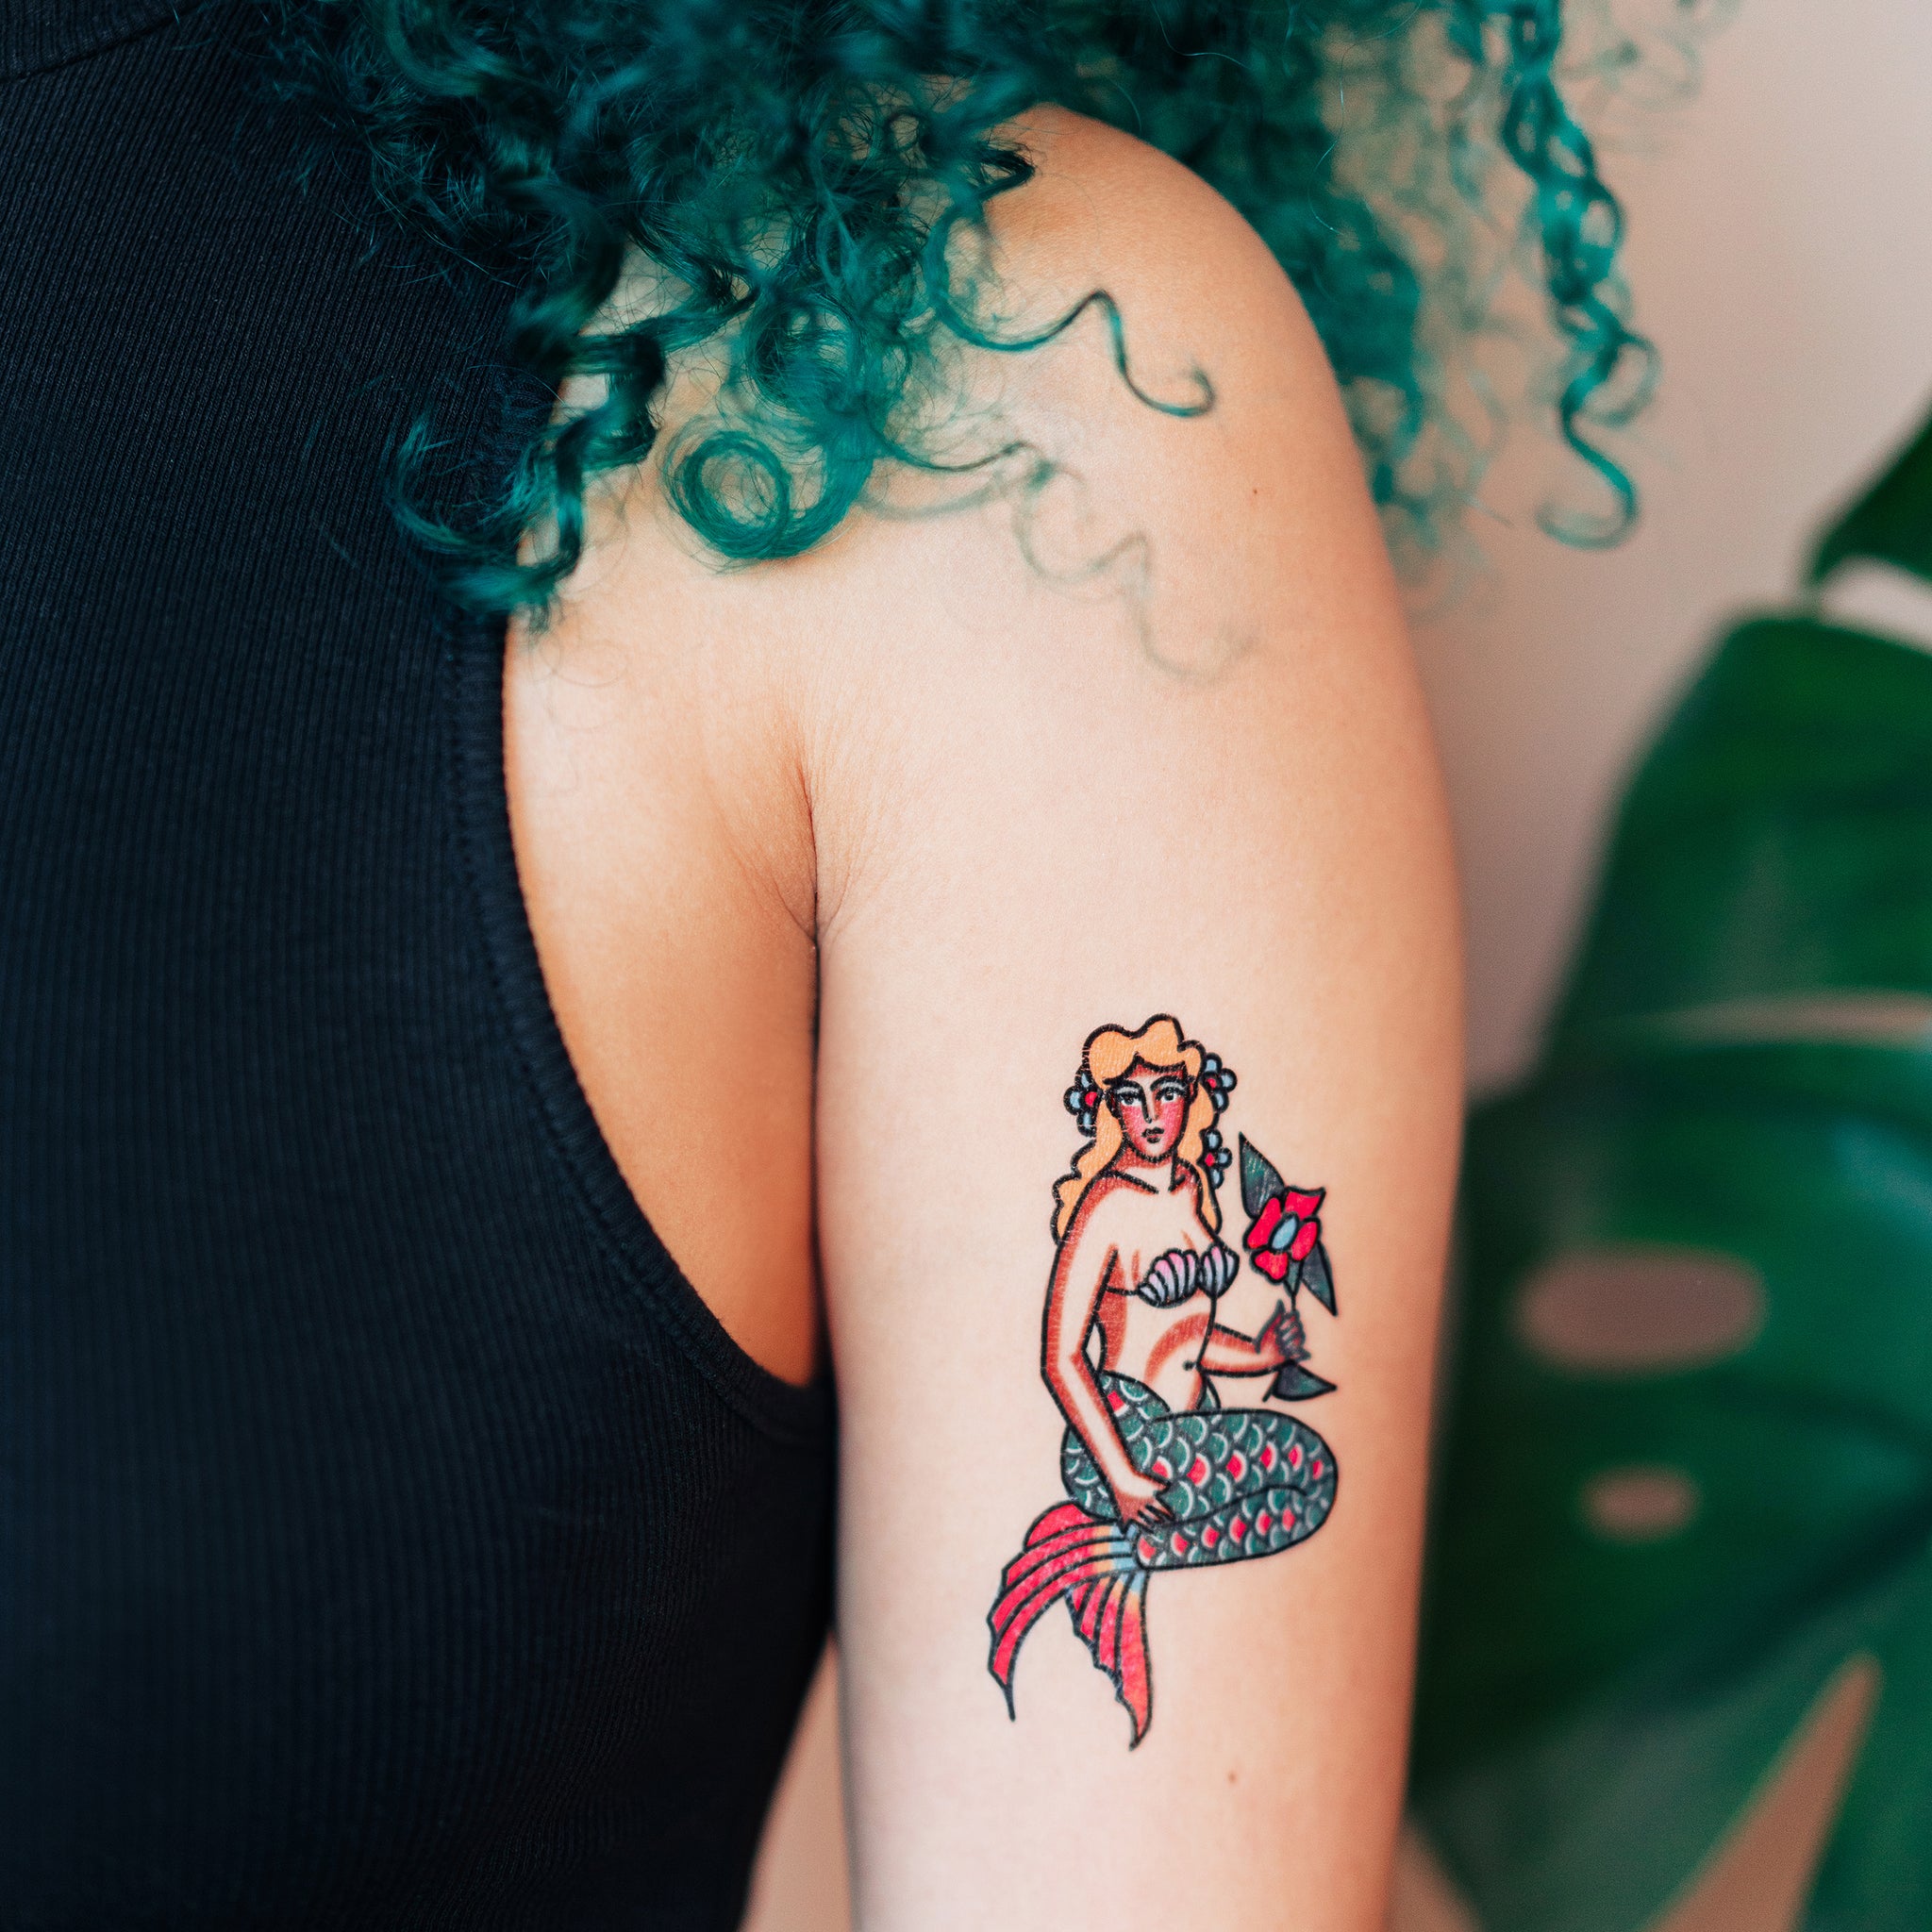 Hayley Williams as a mermaid by Gia Conte, Inked in Eden, Ocean View, New  Jersey : r/tattoos